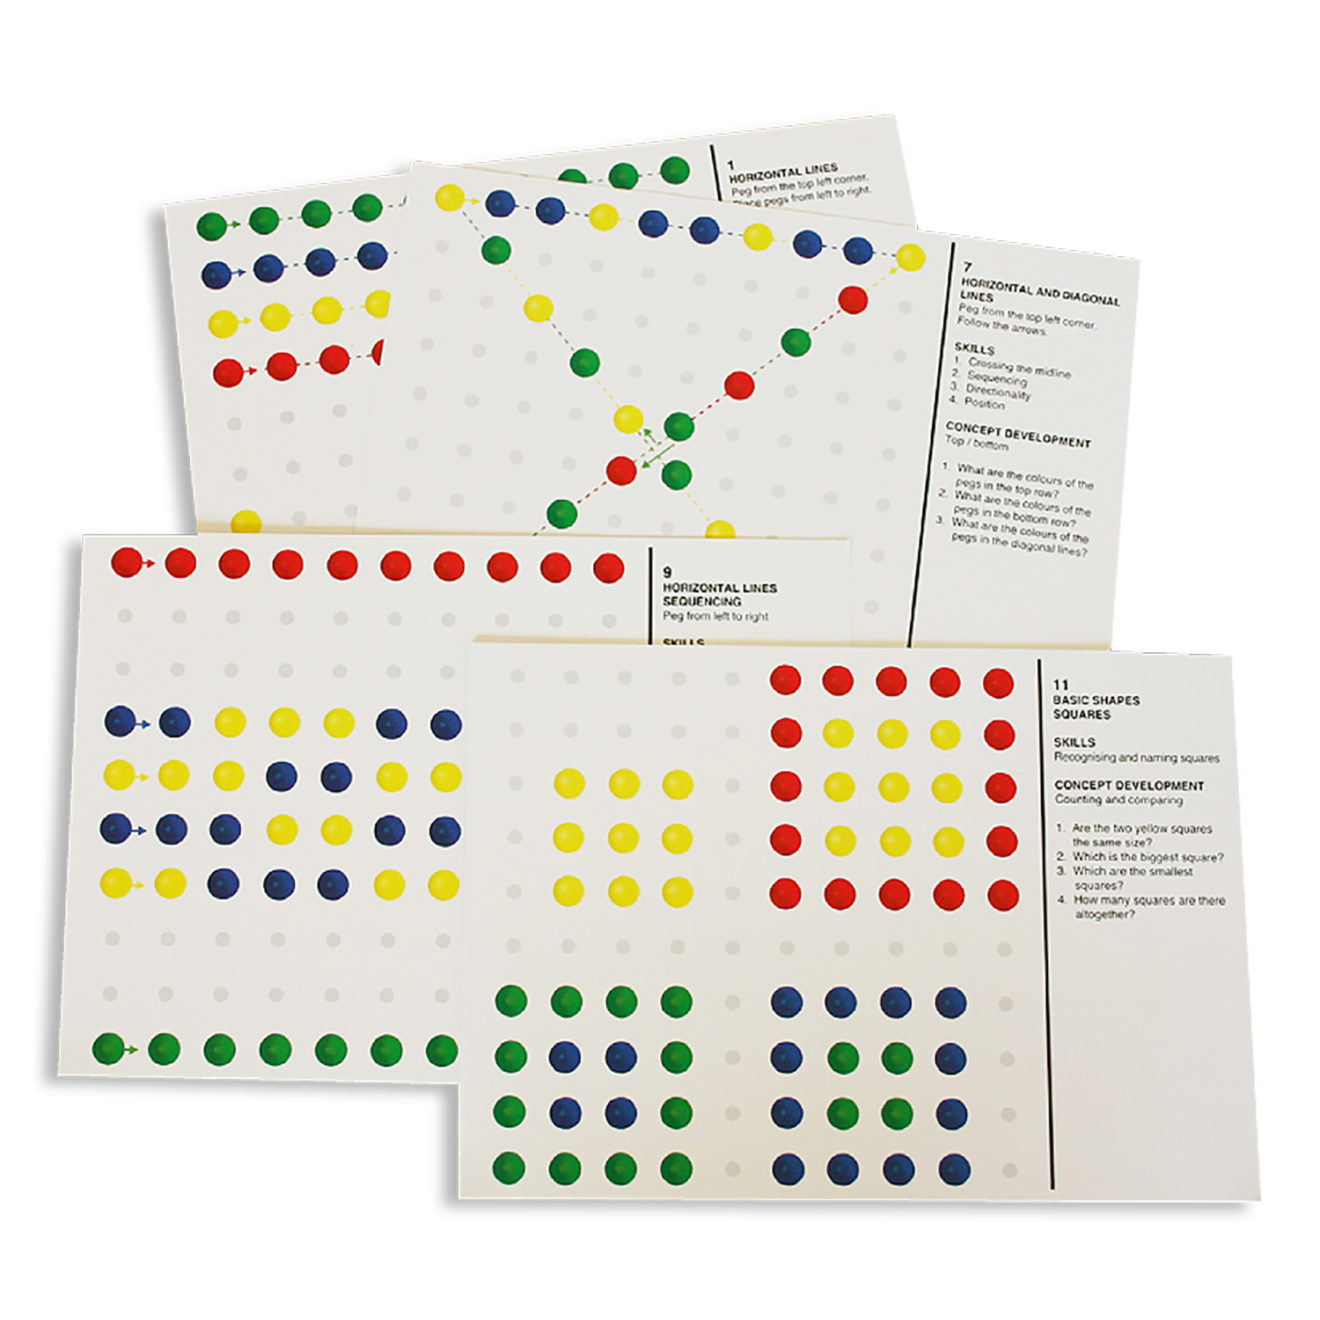 pegboard-pattern-cards-rgs-group